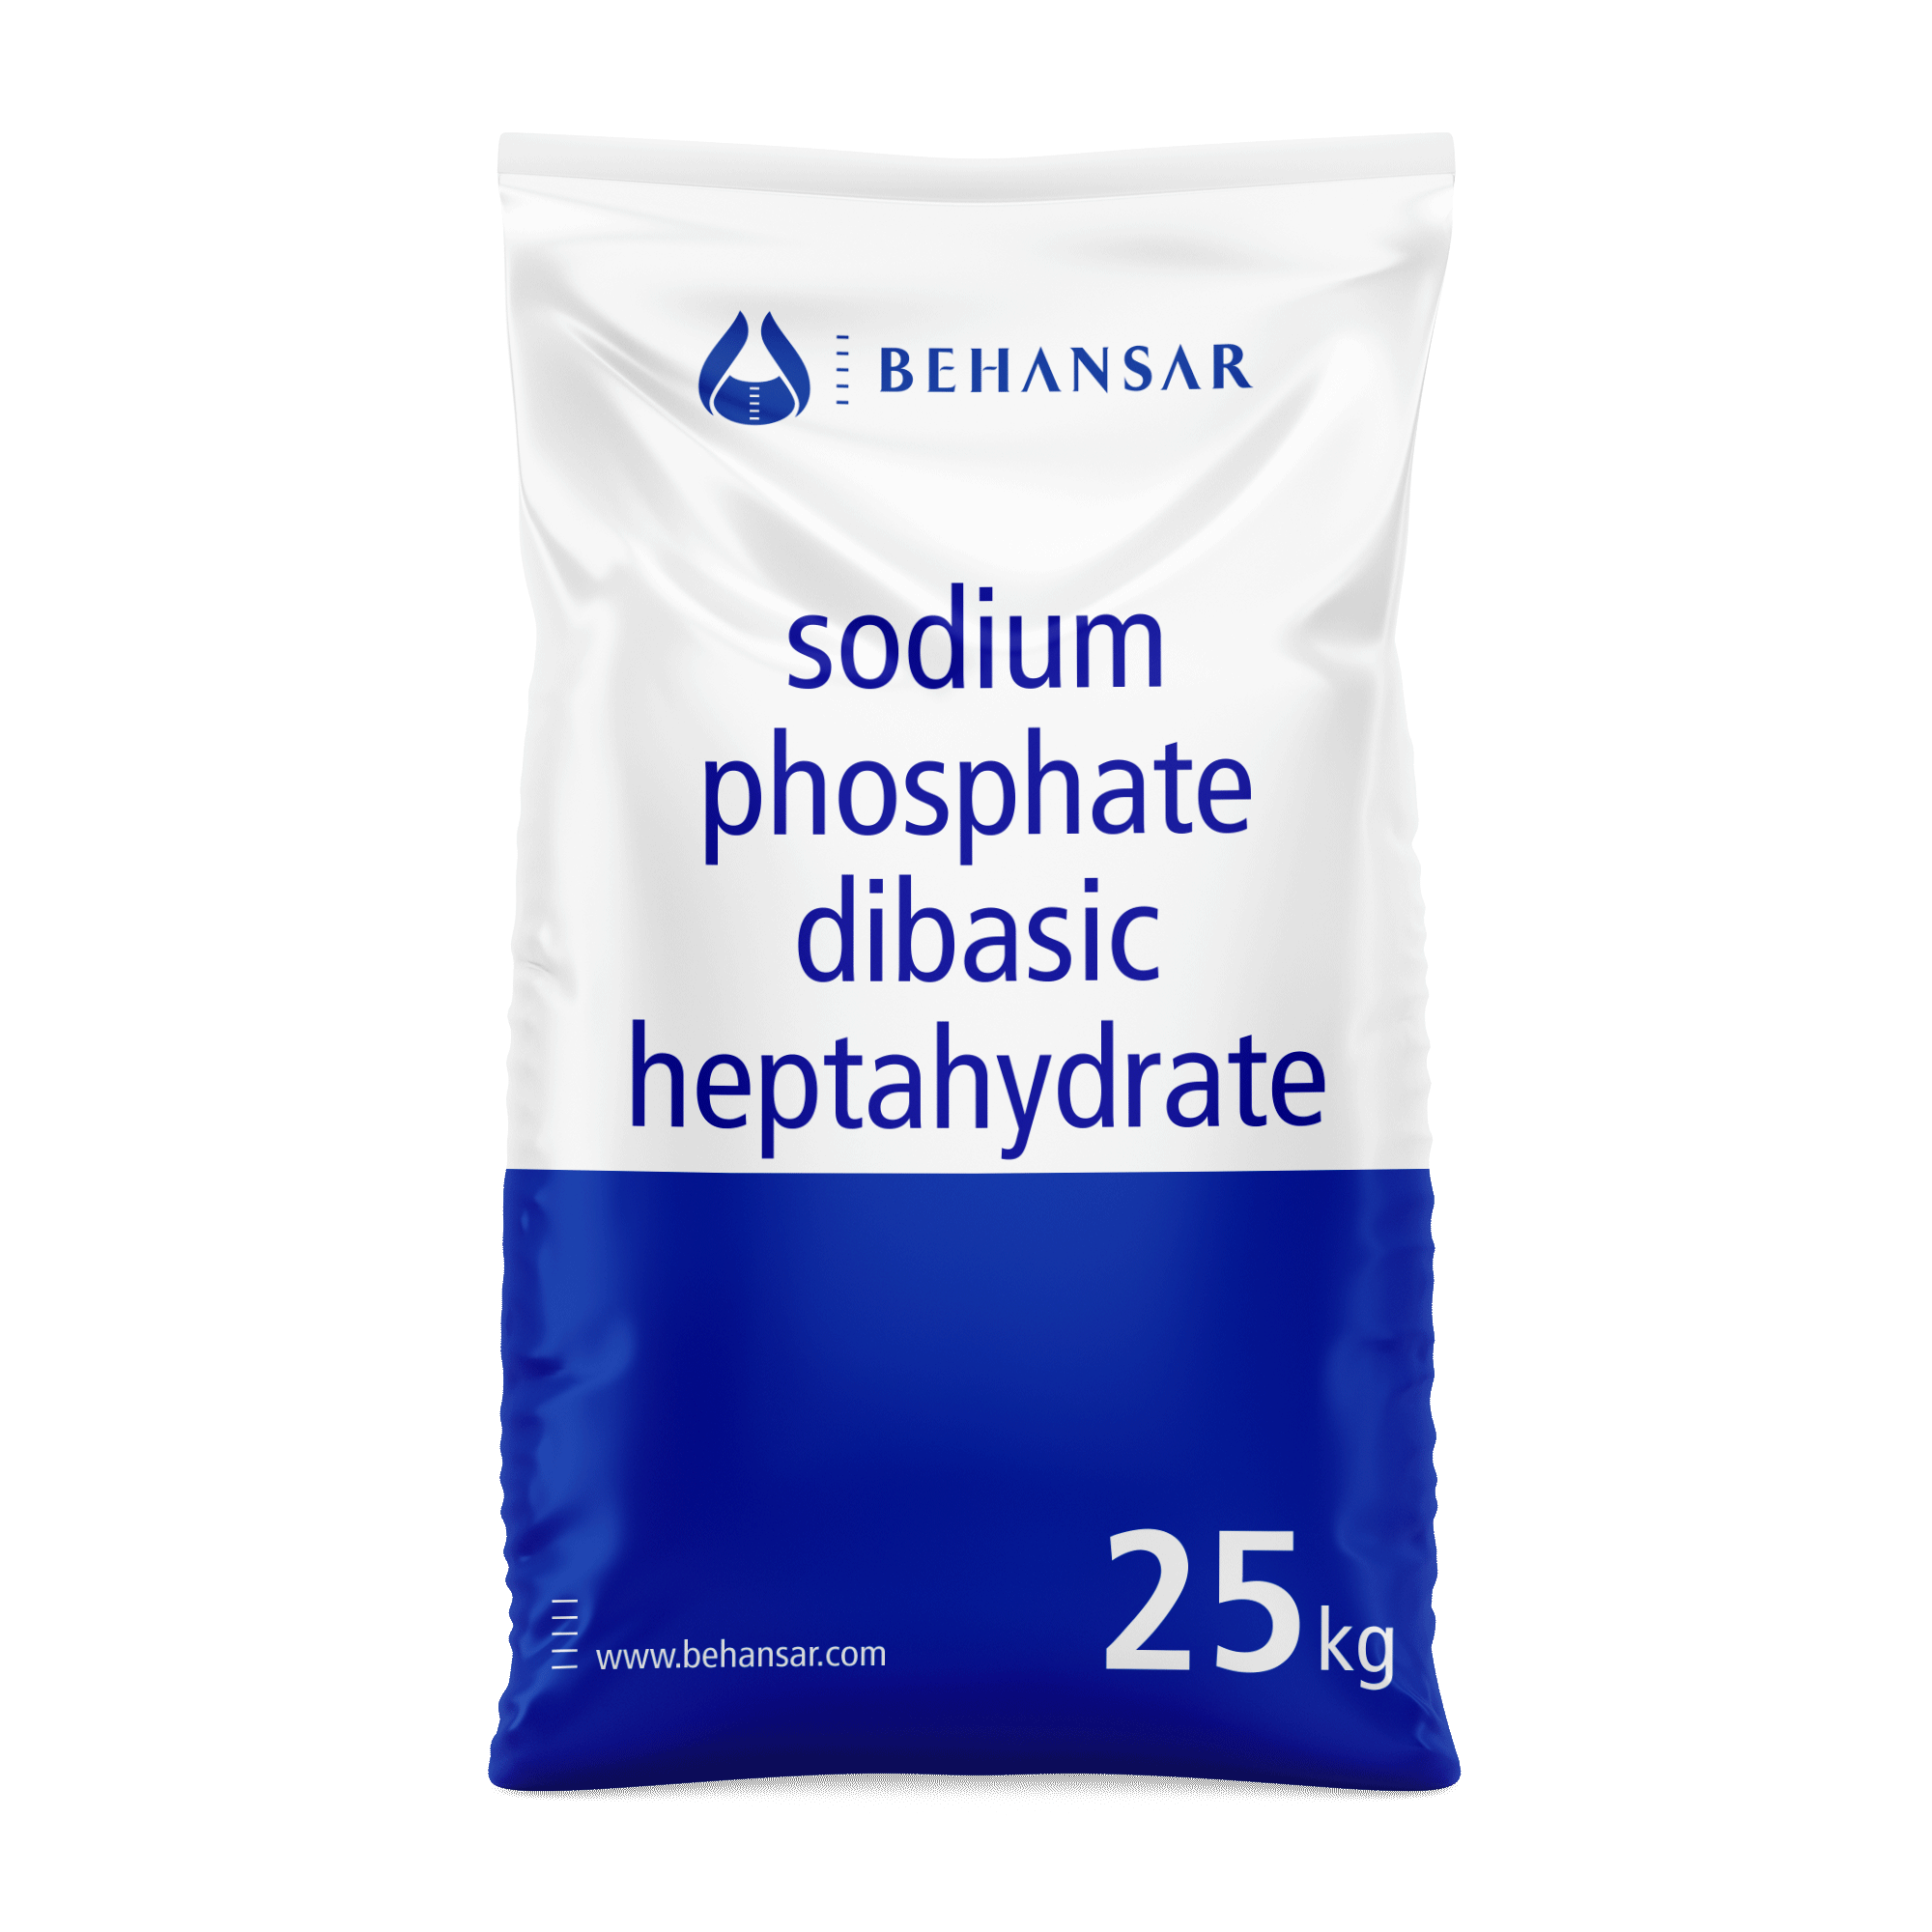 sodium phosphate dibasic heptahydrate is one of the products of Behansar Co